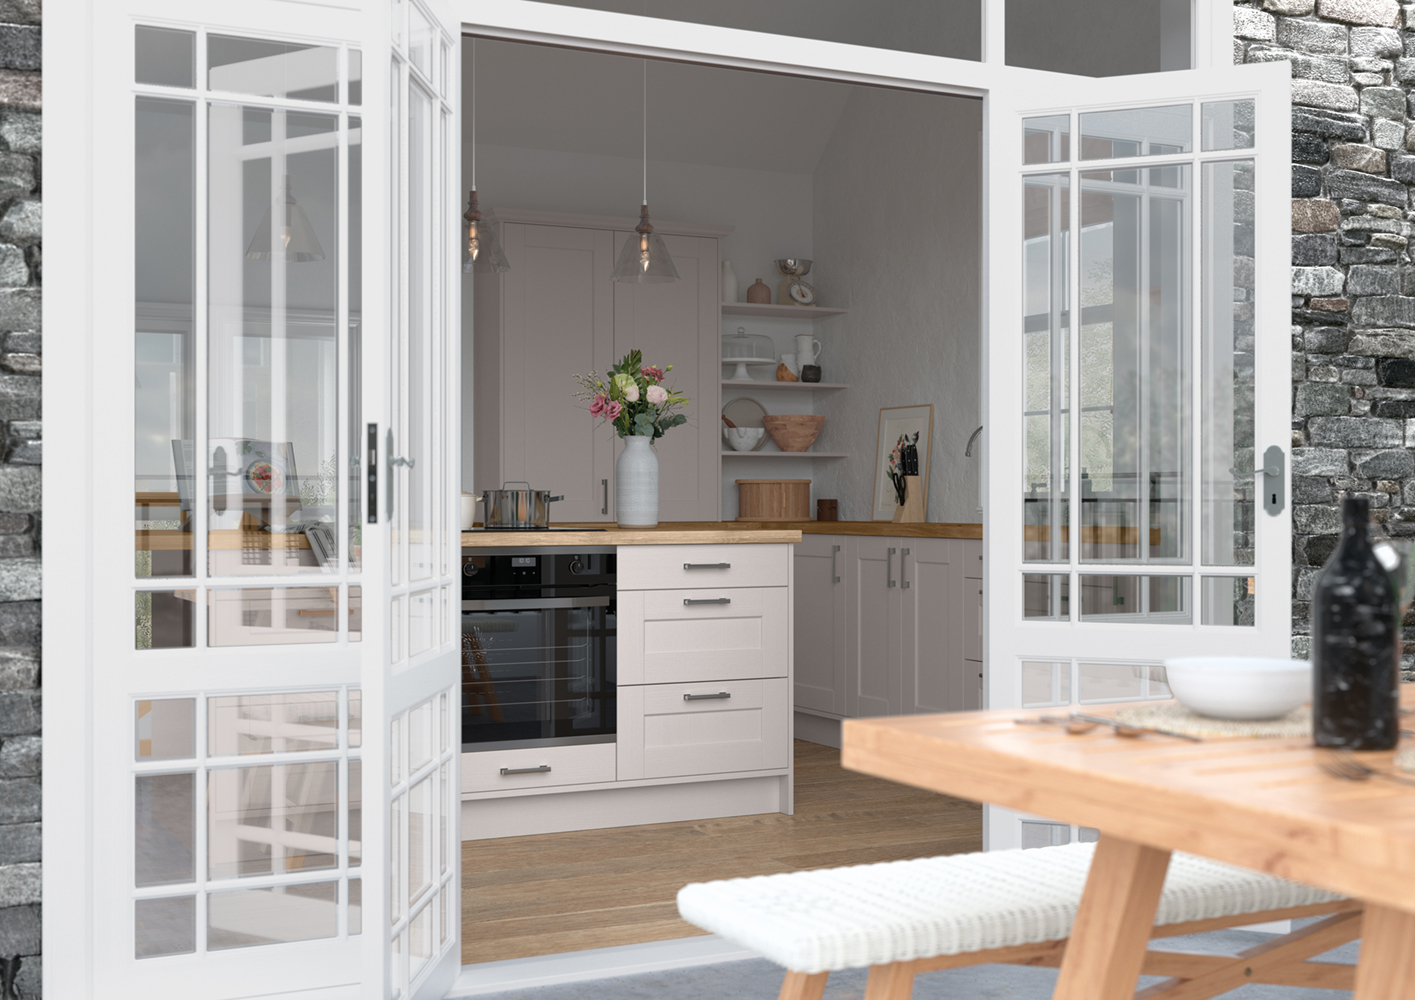 Angle of Kendal Cashmere shaker kitchen from outside, made by The Kitchen Depot